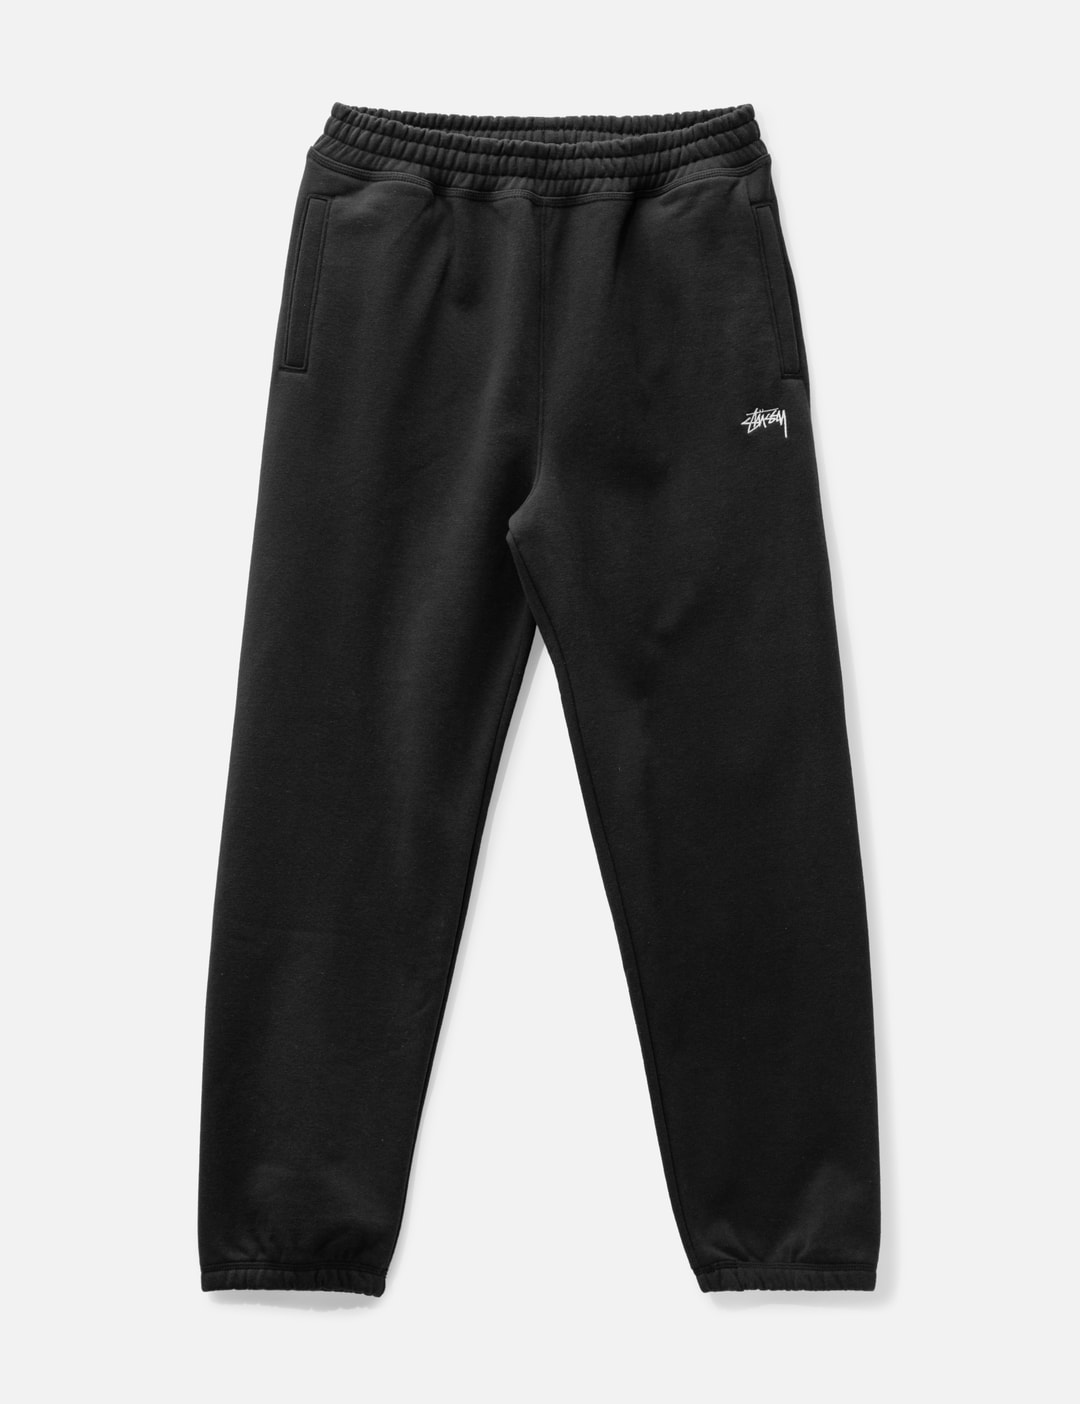 Stüssy Stock Logo Sweatpants Hbx Globally Curated Fashion And